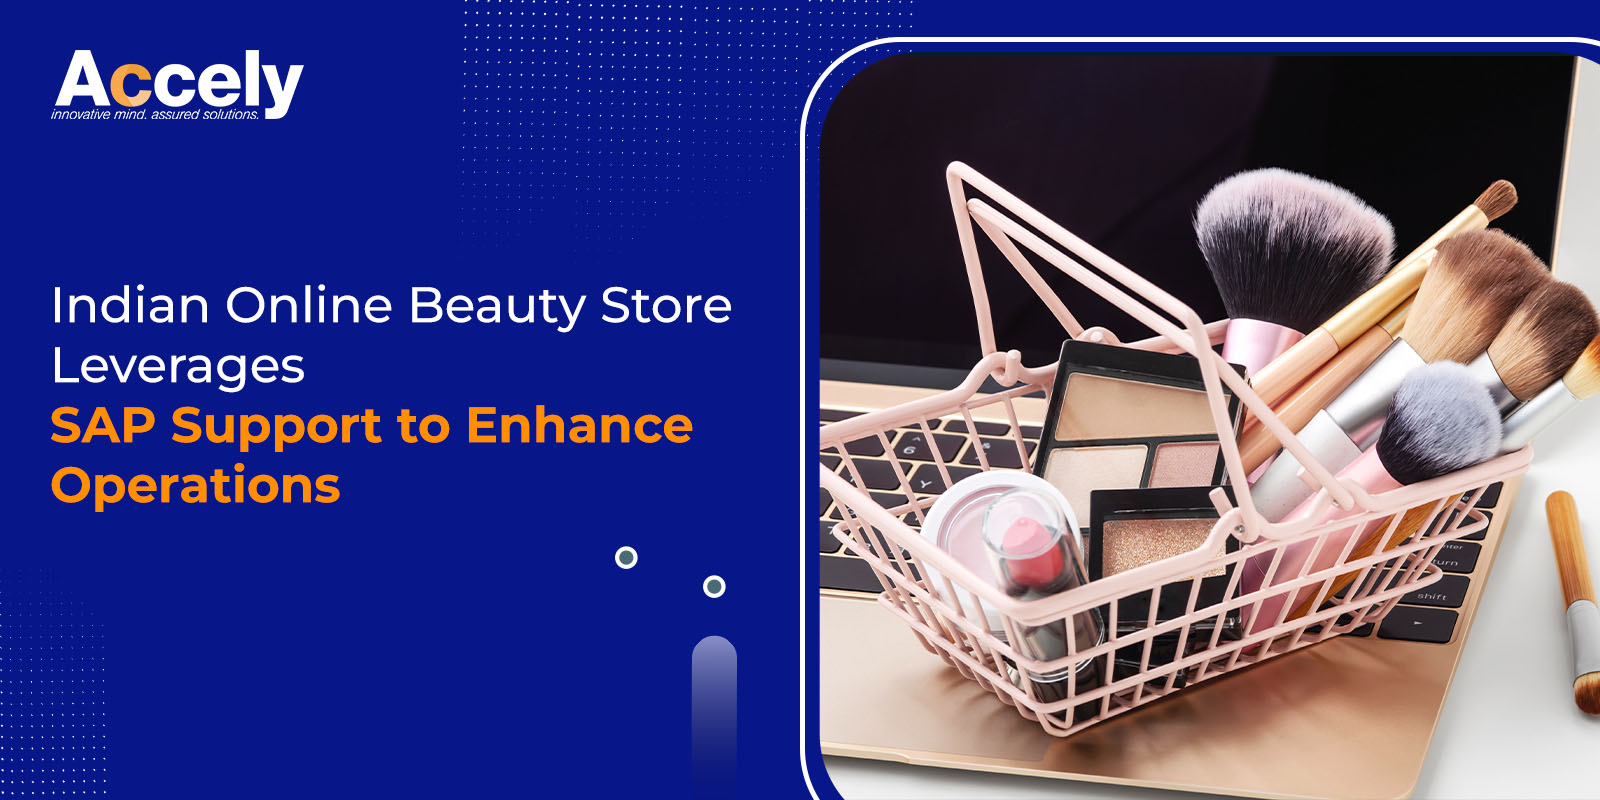 Indian Online Beauty Store Leverages SAP Support to Enhance Operations